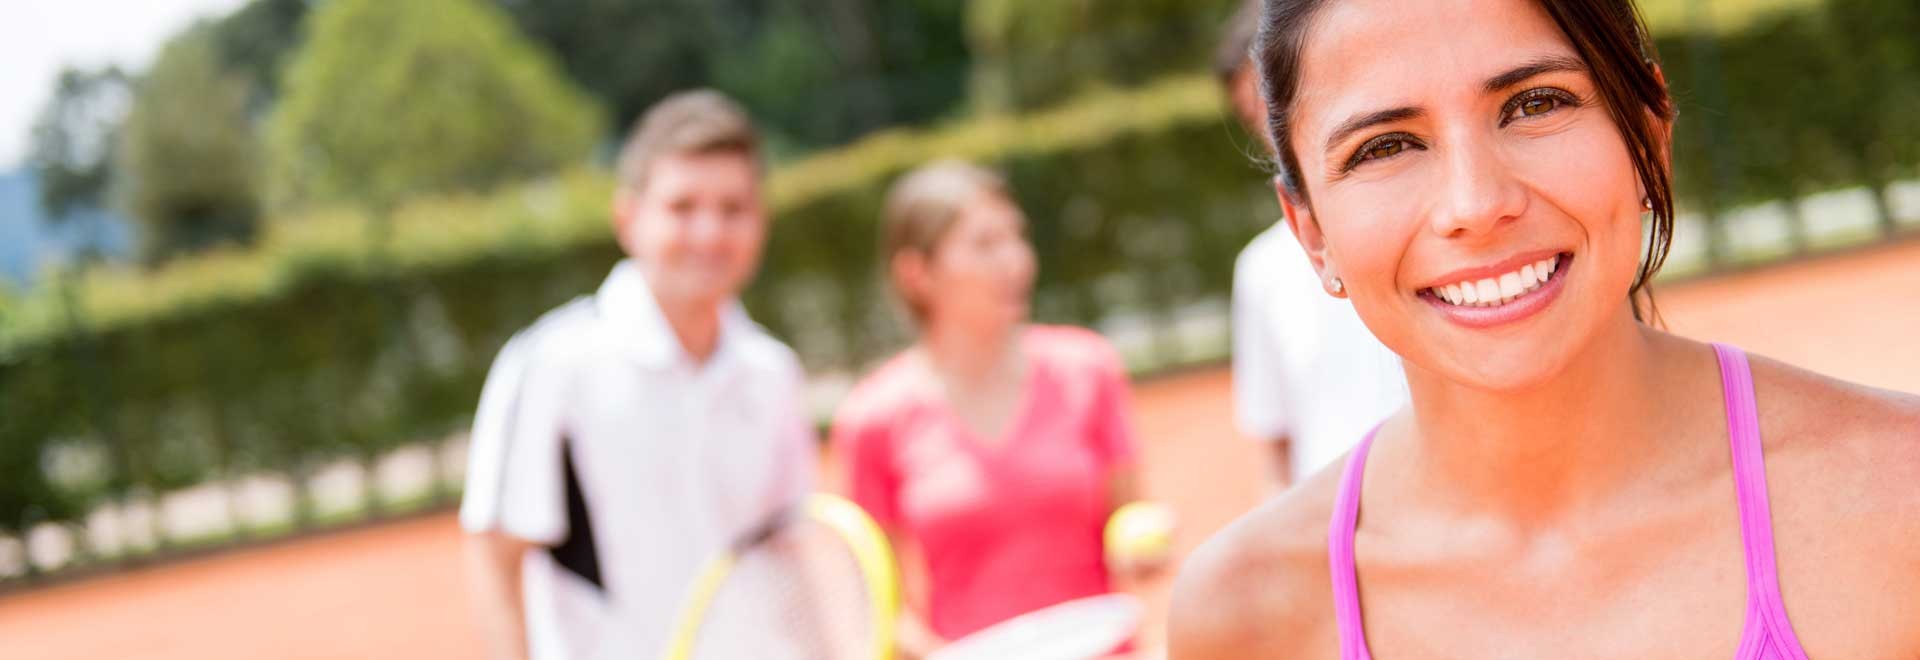 The Top Singles Tennis Holidays Around the World - Travel and meet new friends while playing tennis!